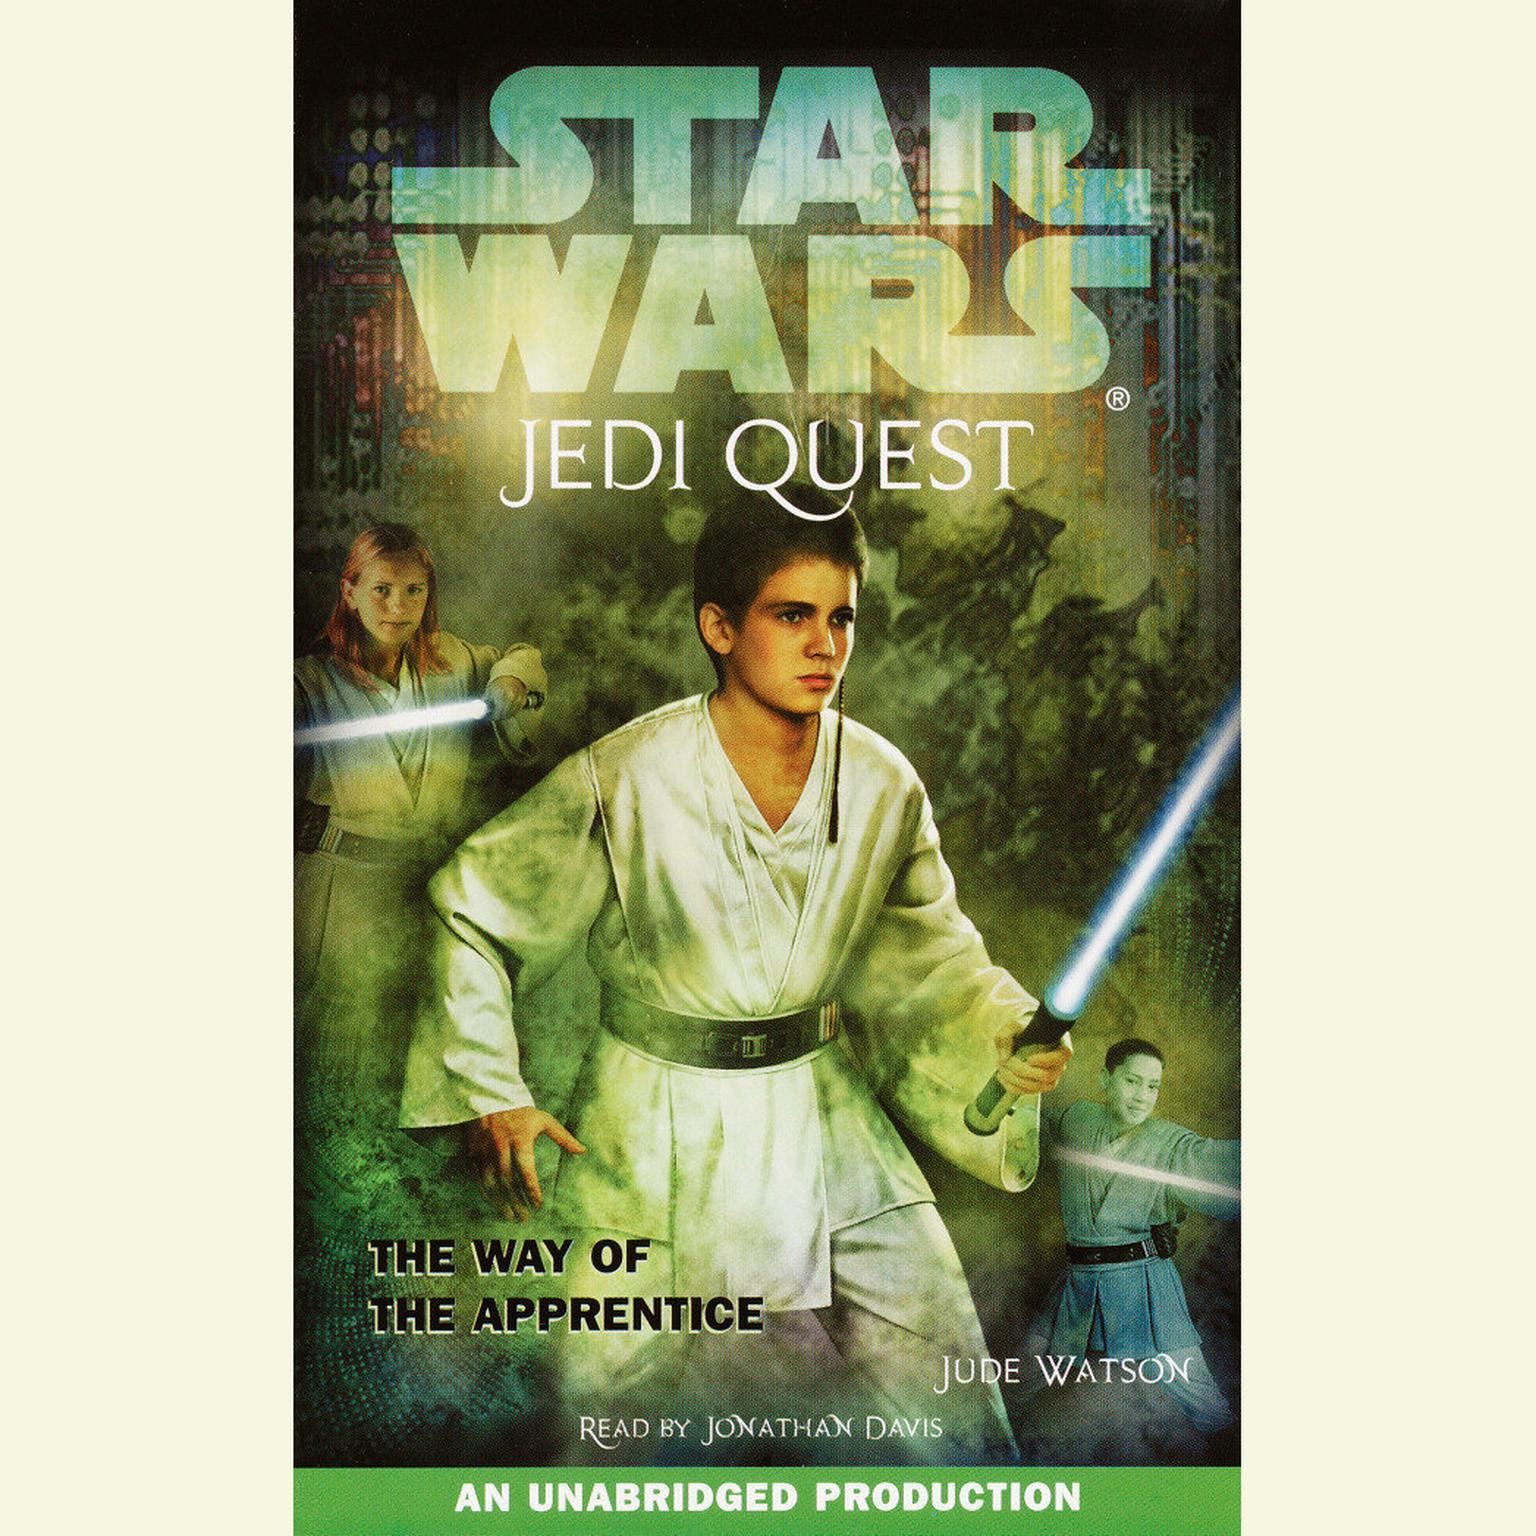 Star Wars: Jedi Quest #1: The Way of the Apprentice Audiobook, by Jude Watson